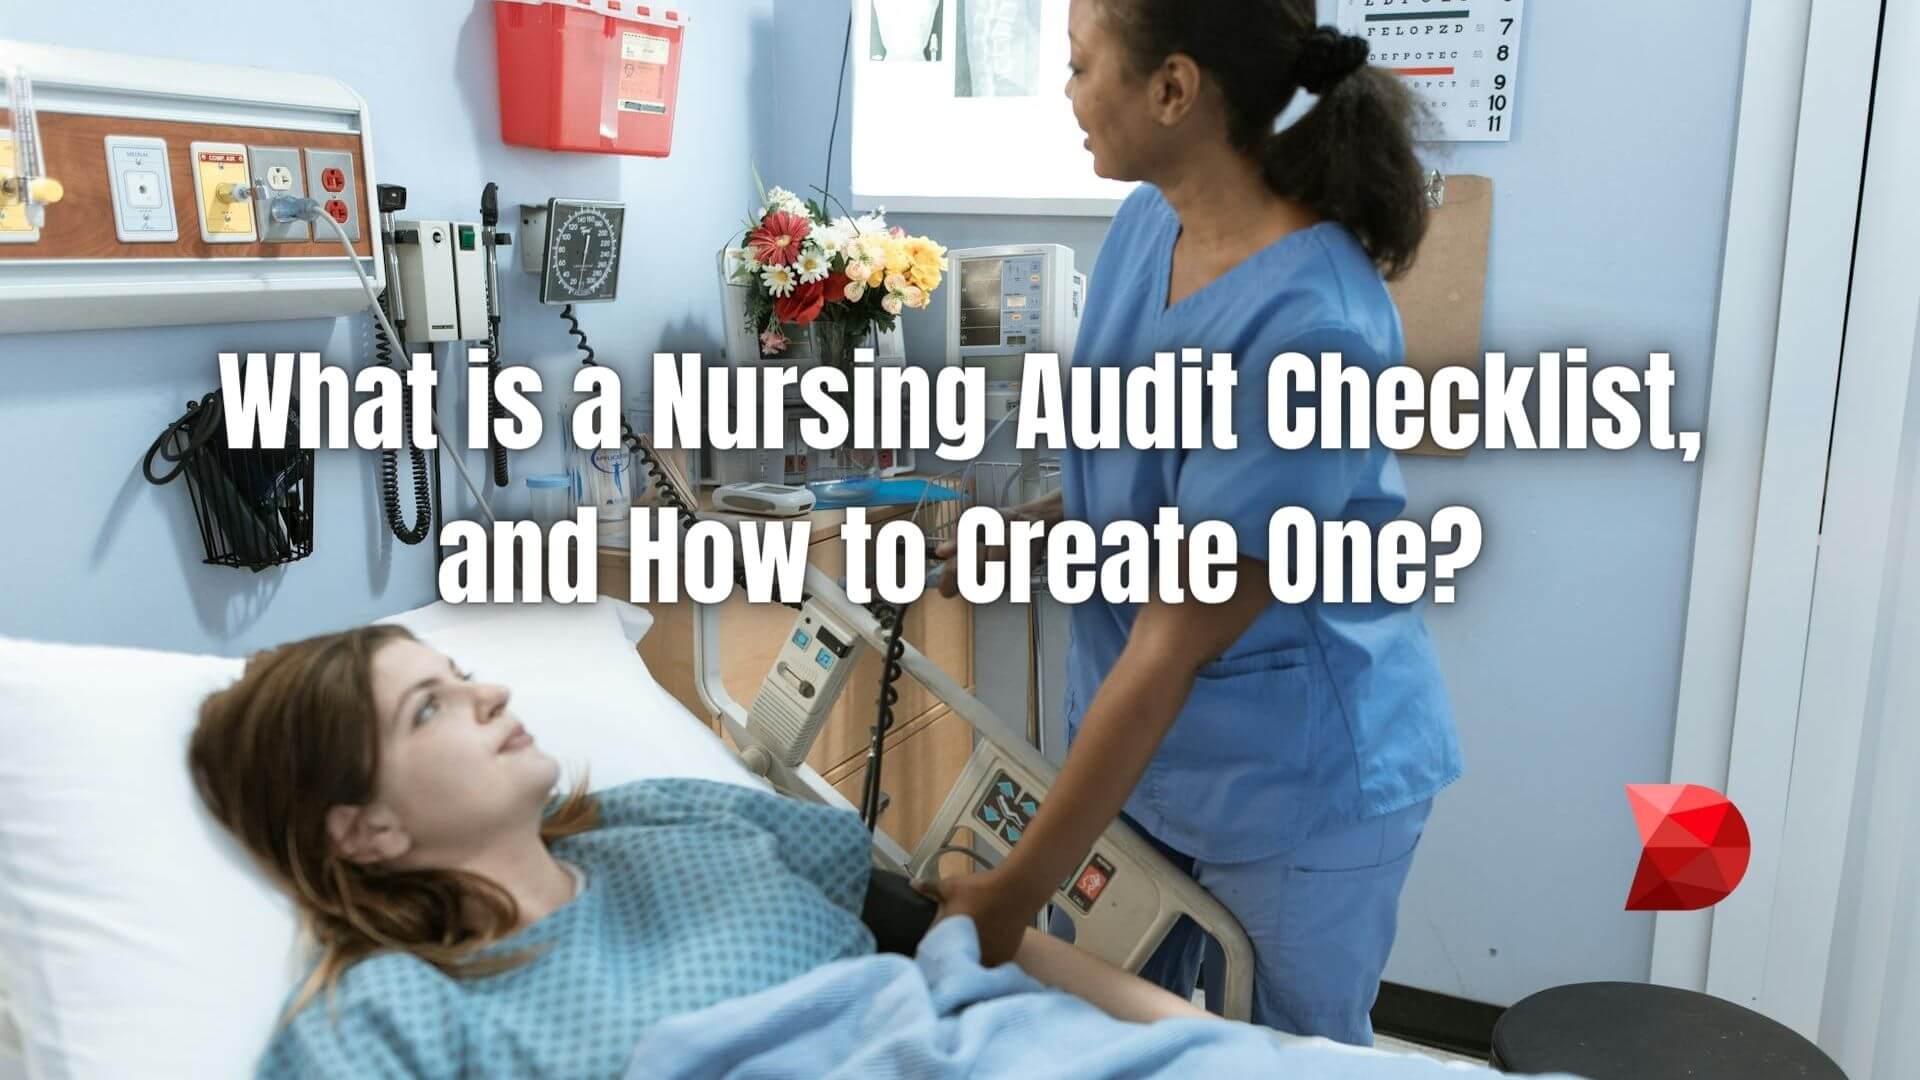 Unlock efficiency with our full guide to creating a nursing audit checklist. Learn the essentials and master the process effortlessly.